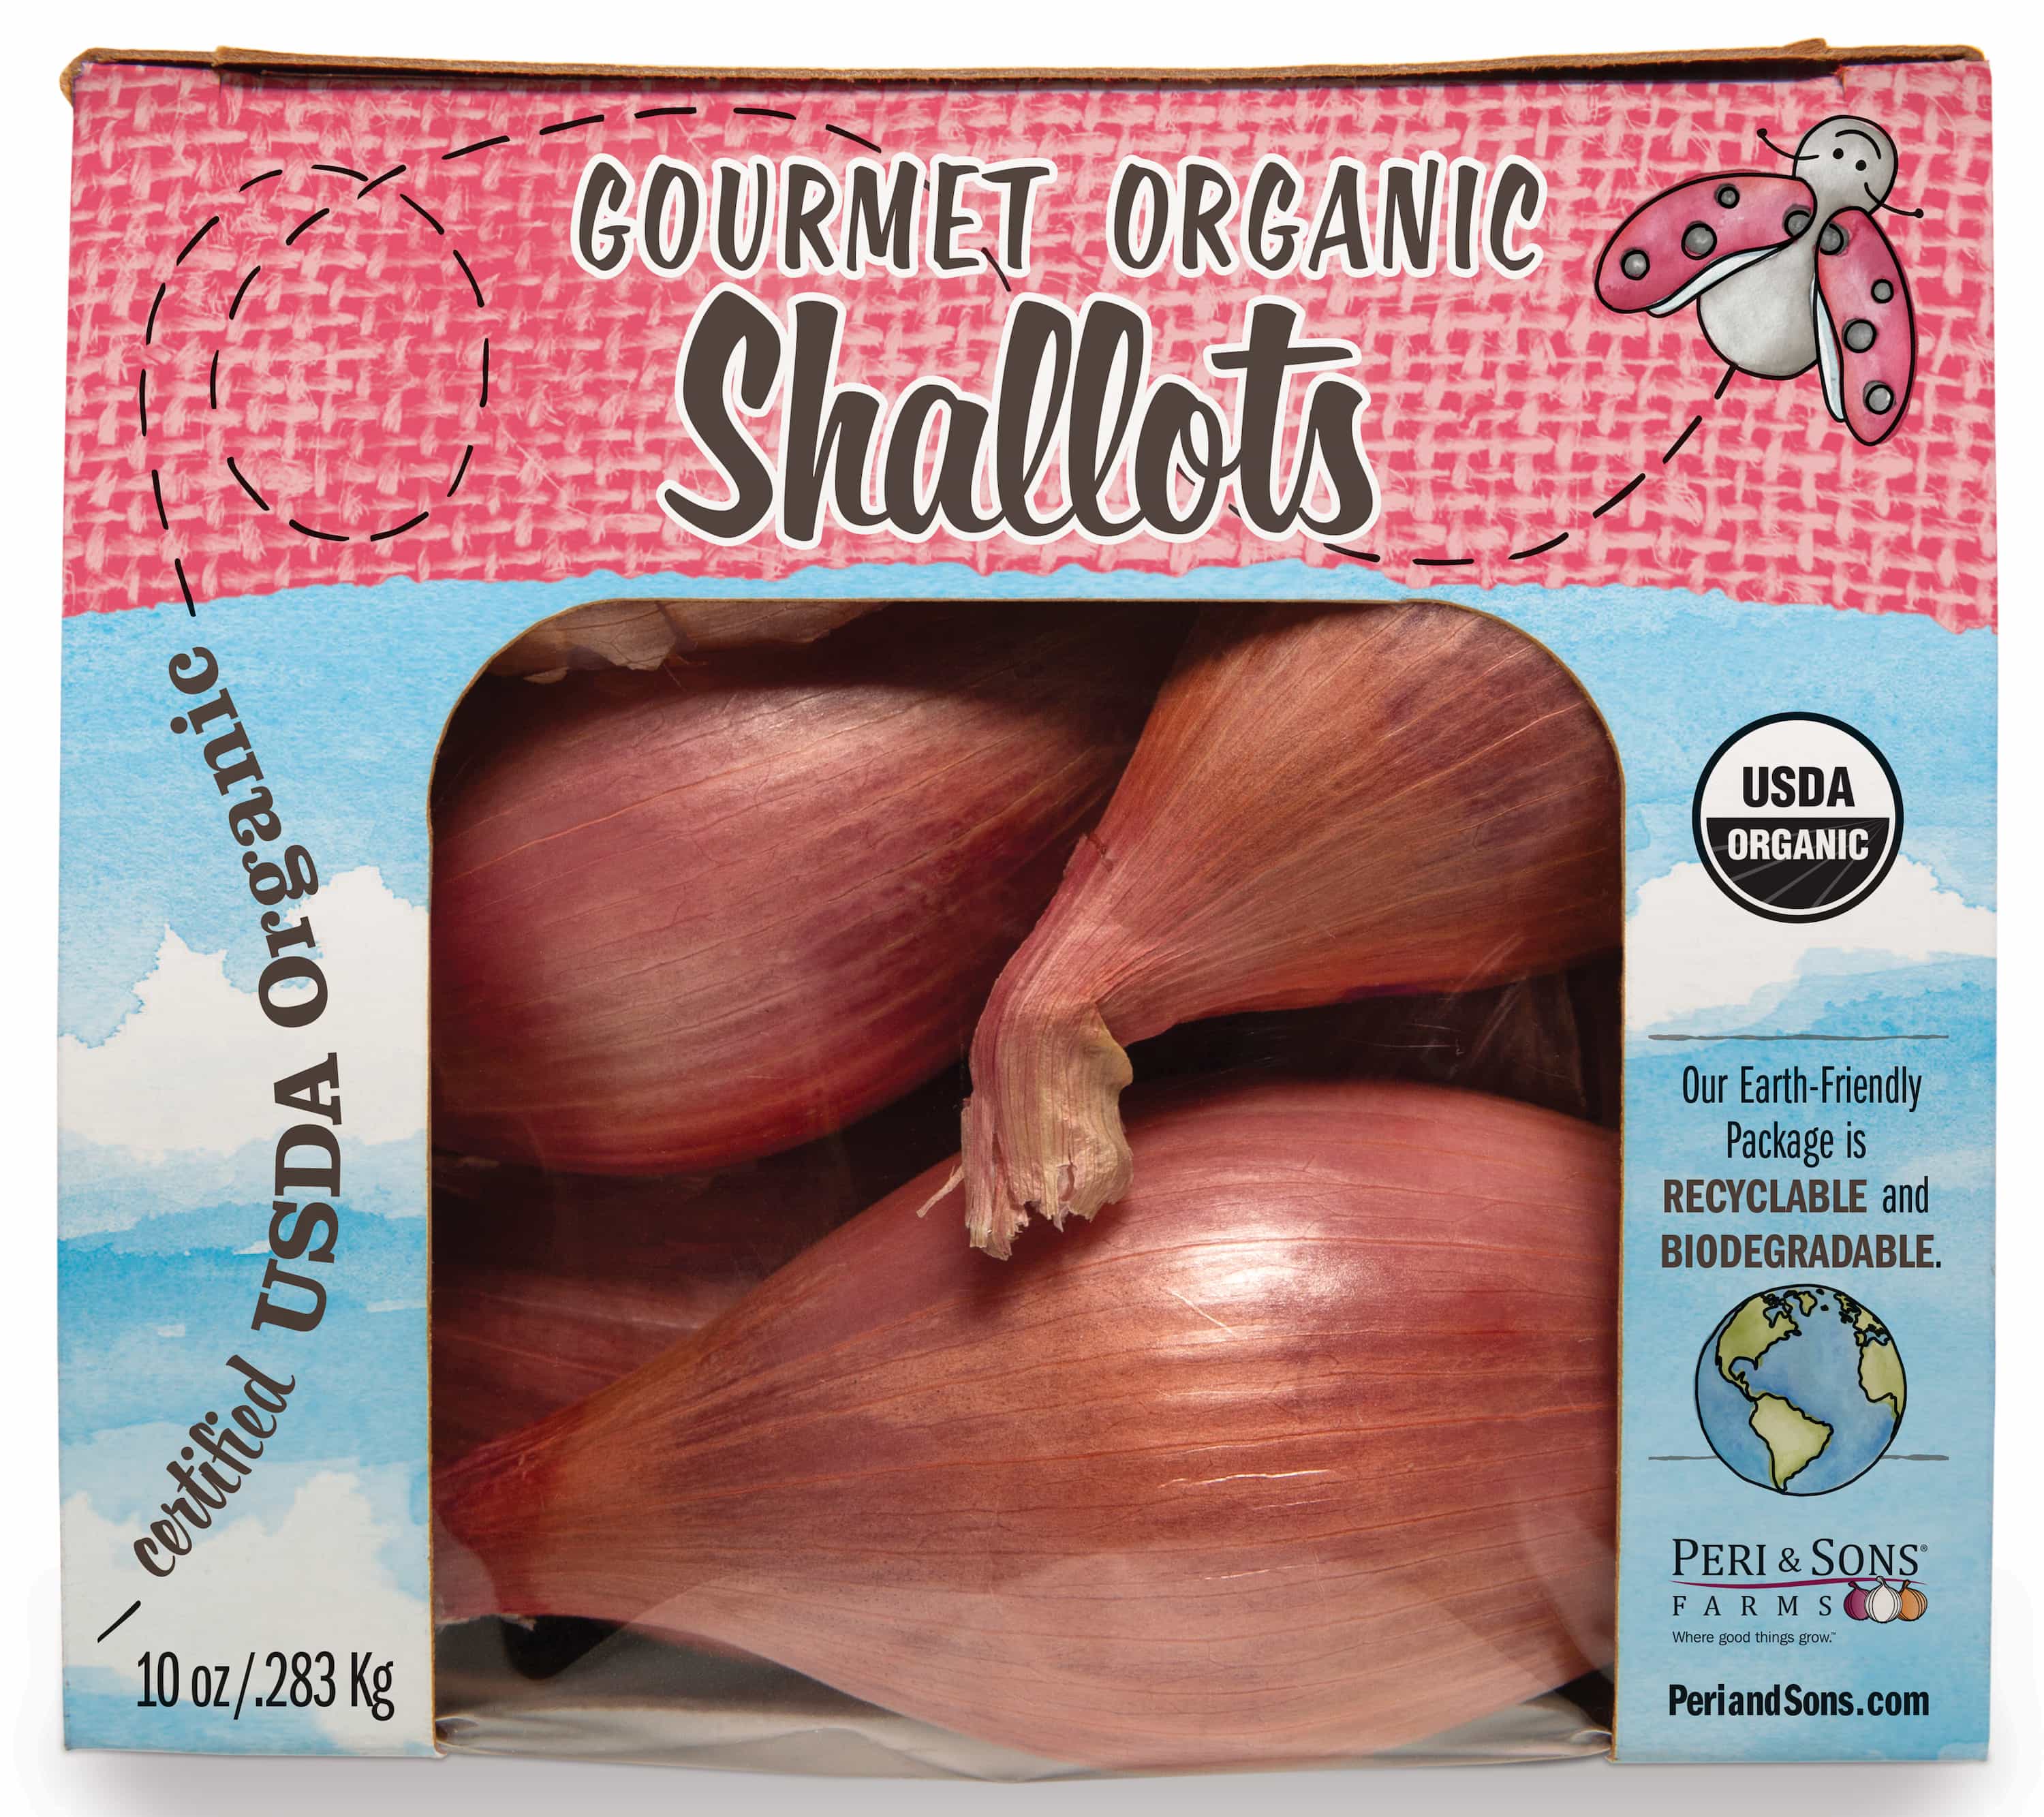 A bag of Peri & Sons gourmet organic shallots. Red shallots can be see through the window of the package that has the USDA Organic stamp and the text: Our Earth-Friendly Package is recyclable and biodegradable.